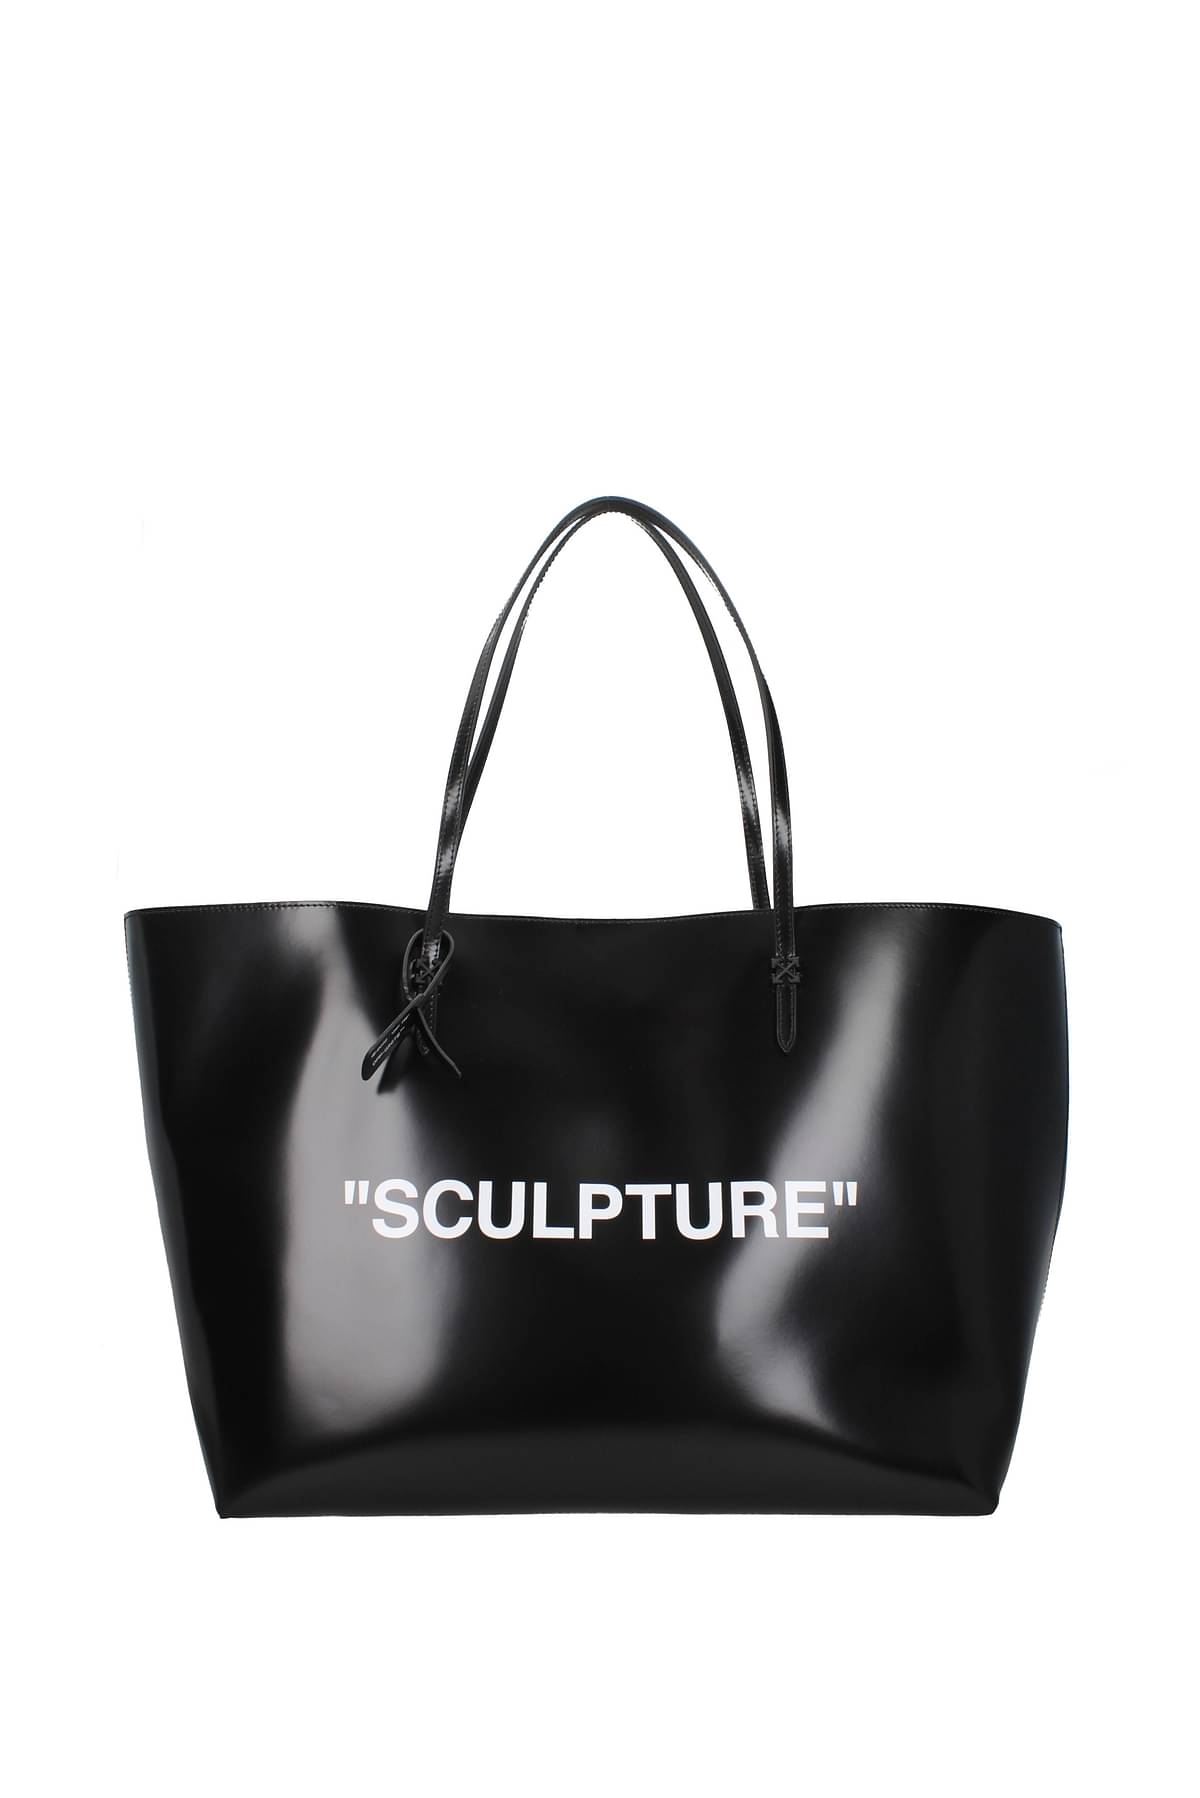 Off-White Shoulder bags quote Women OWNA186LEA0011001 Leather